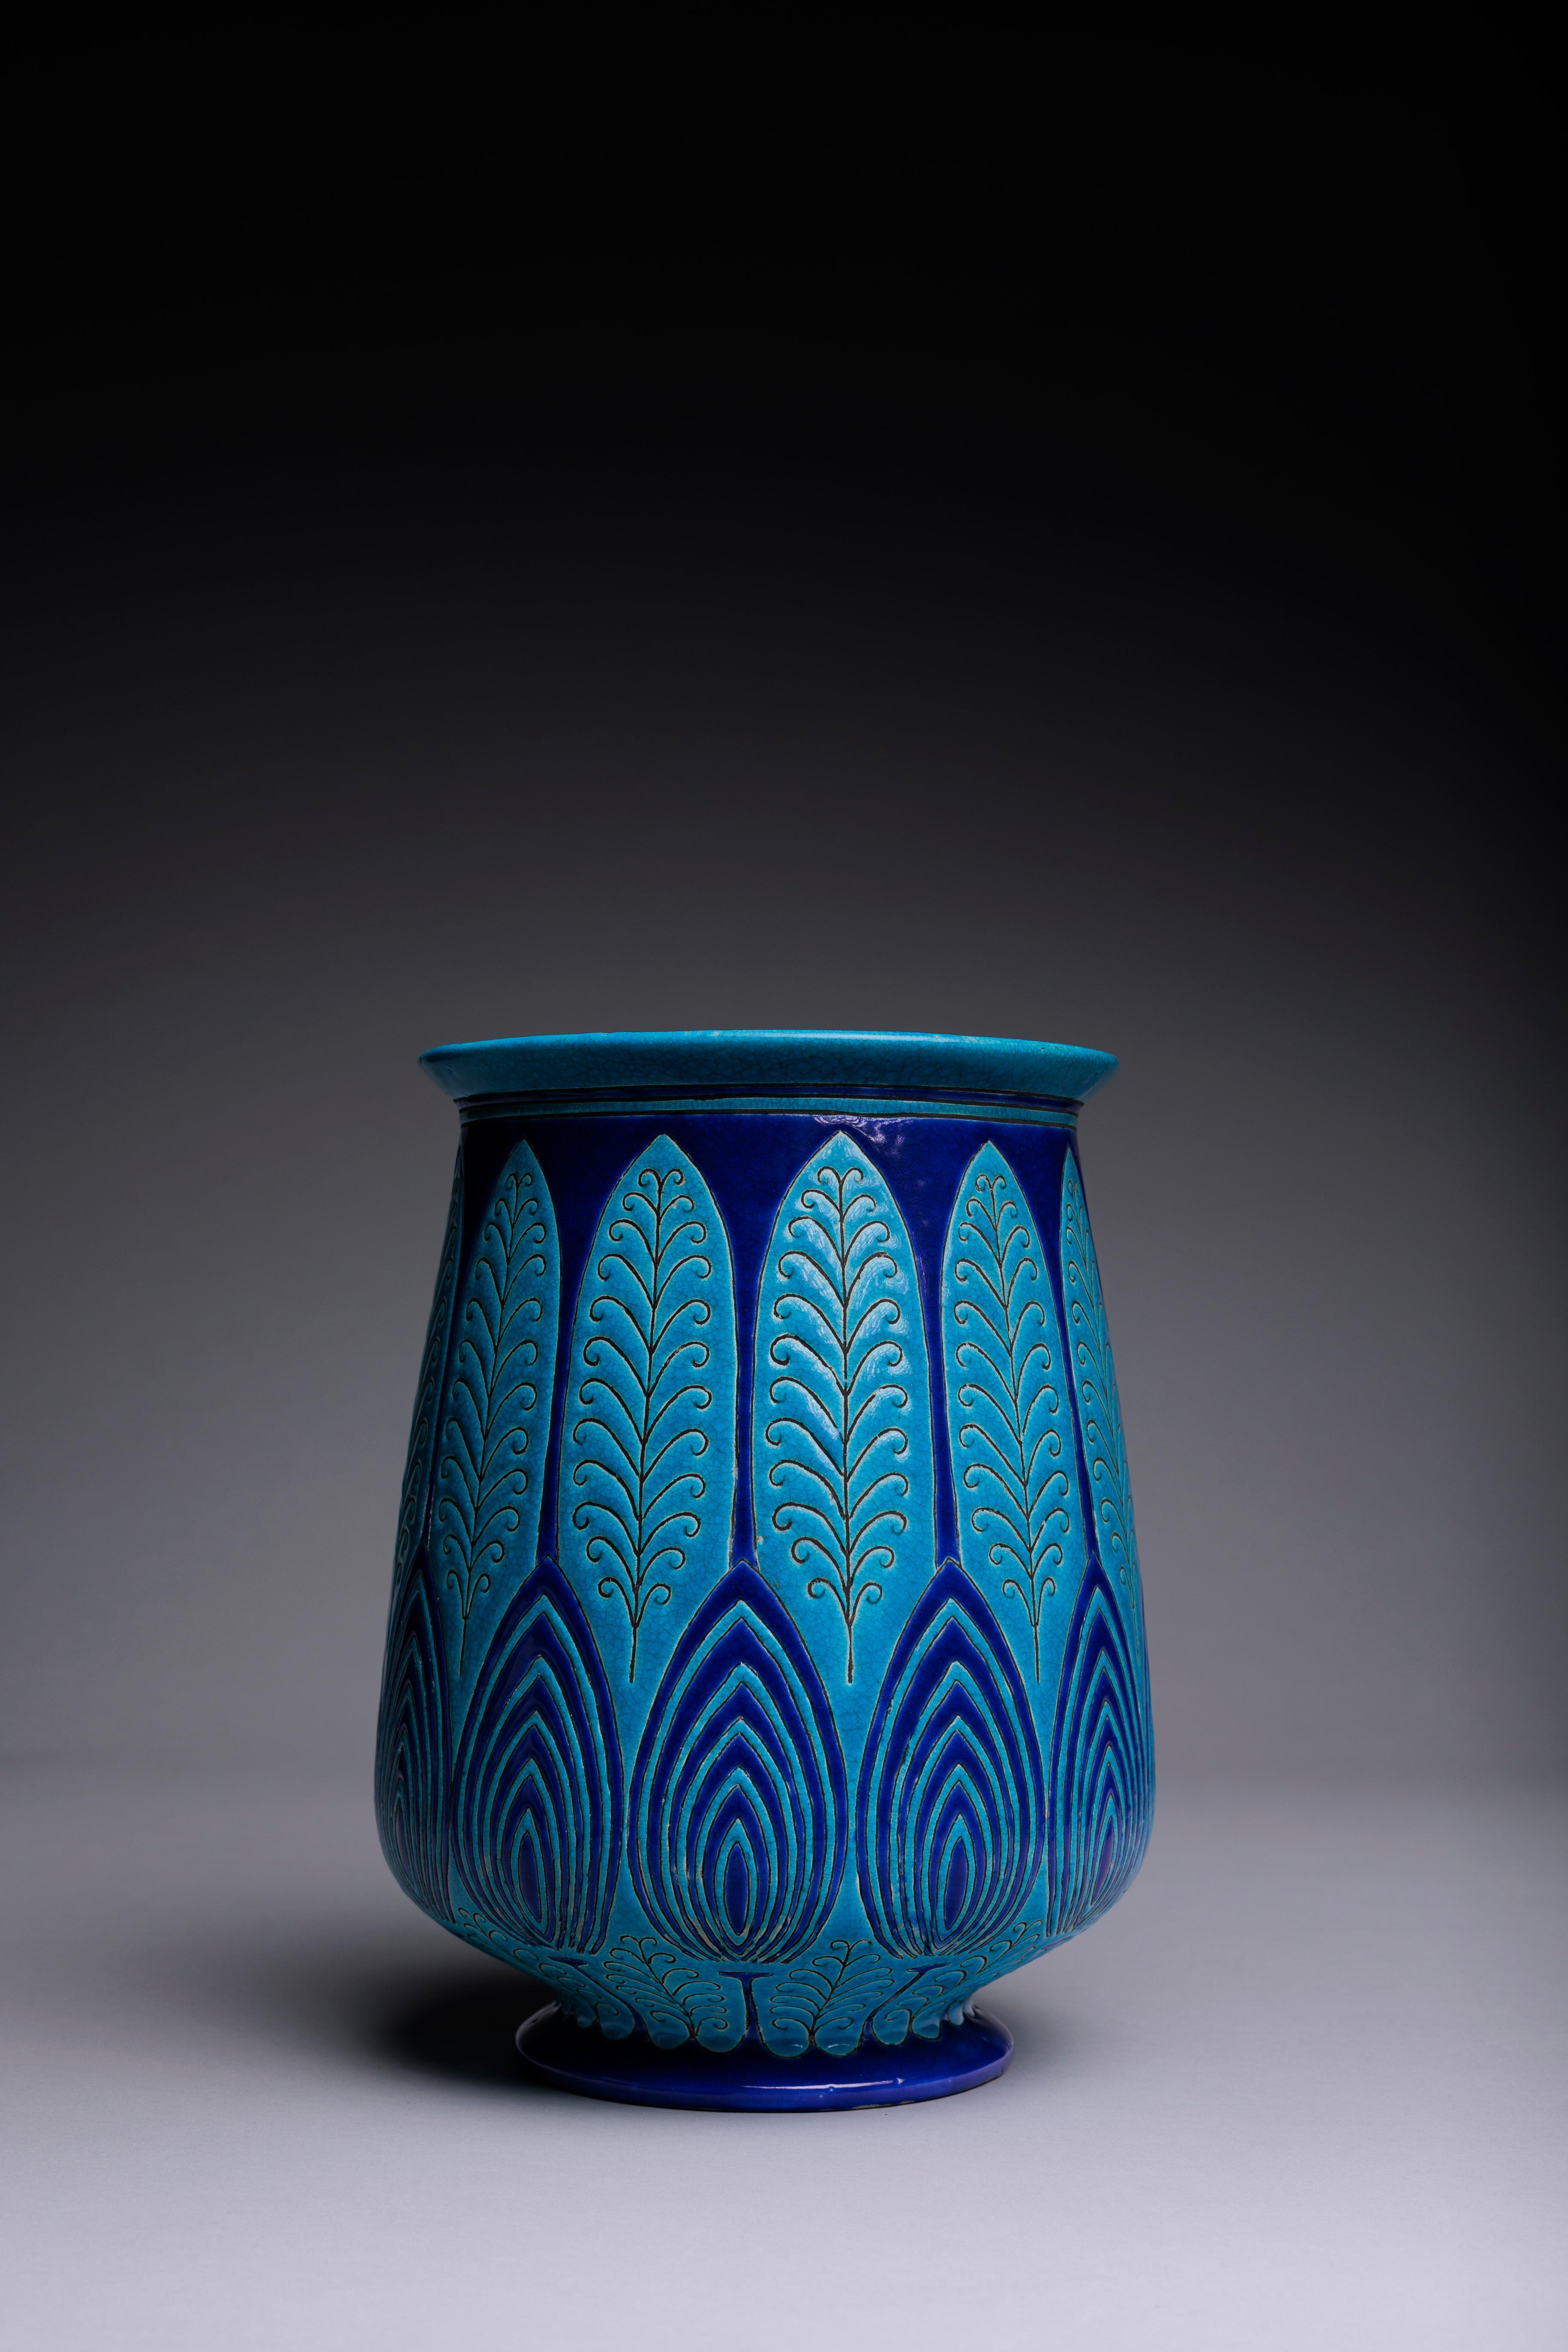 A brilliant turquoise Art Deco pottery jardinière made by the French faiencerie Longwy circa 1920.

The jardiniere was part of a special line for the Atelier Primavera, the in-house design studio in the Paris department store Au Printemps.⁠ The